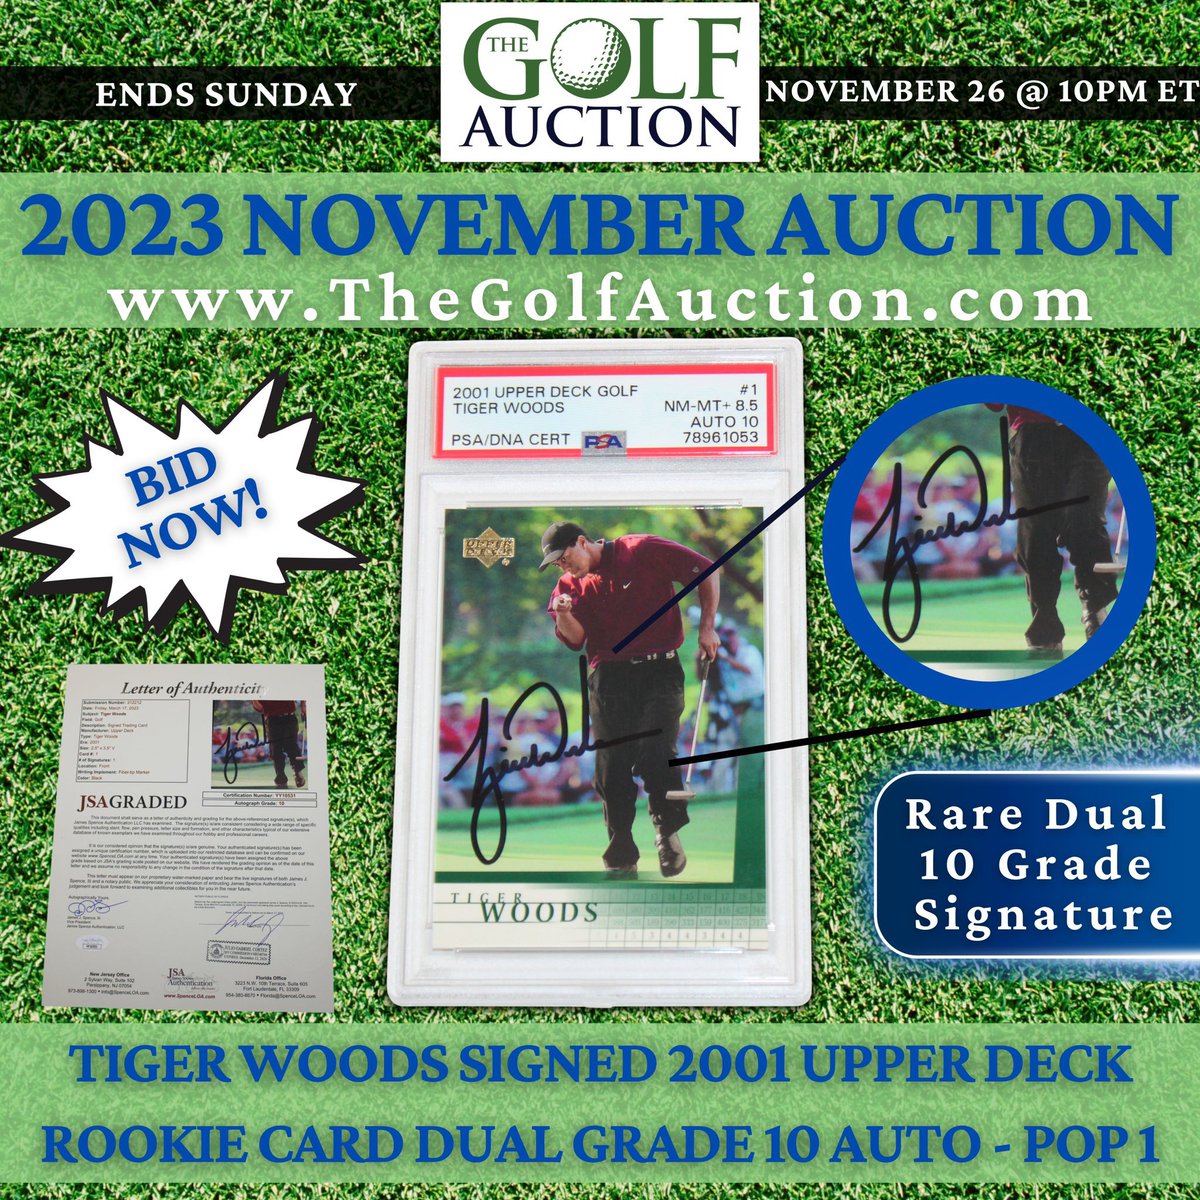 Ending Sunday at 10pm ET 👉 

Bid Now at The Golf Auction on RARE #TigerWoods signed item! ⛳️

#JSAgraded 10 AUTO Rookie Trading Card

Dual Grade 10 Sig #PSA10 #JSA10

View Auction Listing - thegolfauction.com/mobile/LotDeta…

#jsaauthenticated #upperdeck #thegolfauction